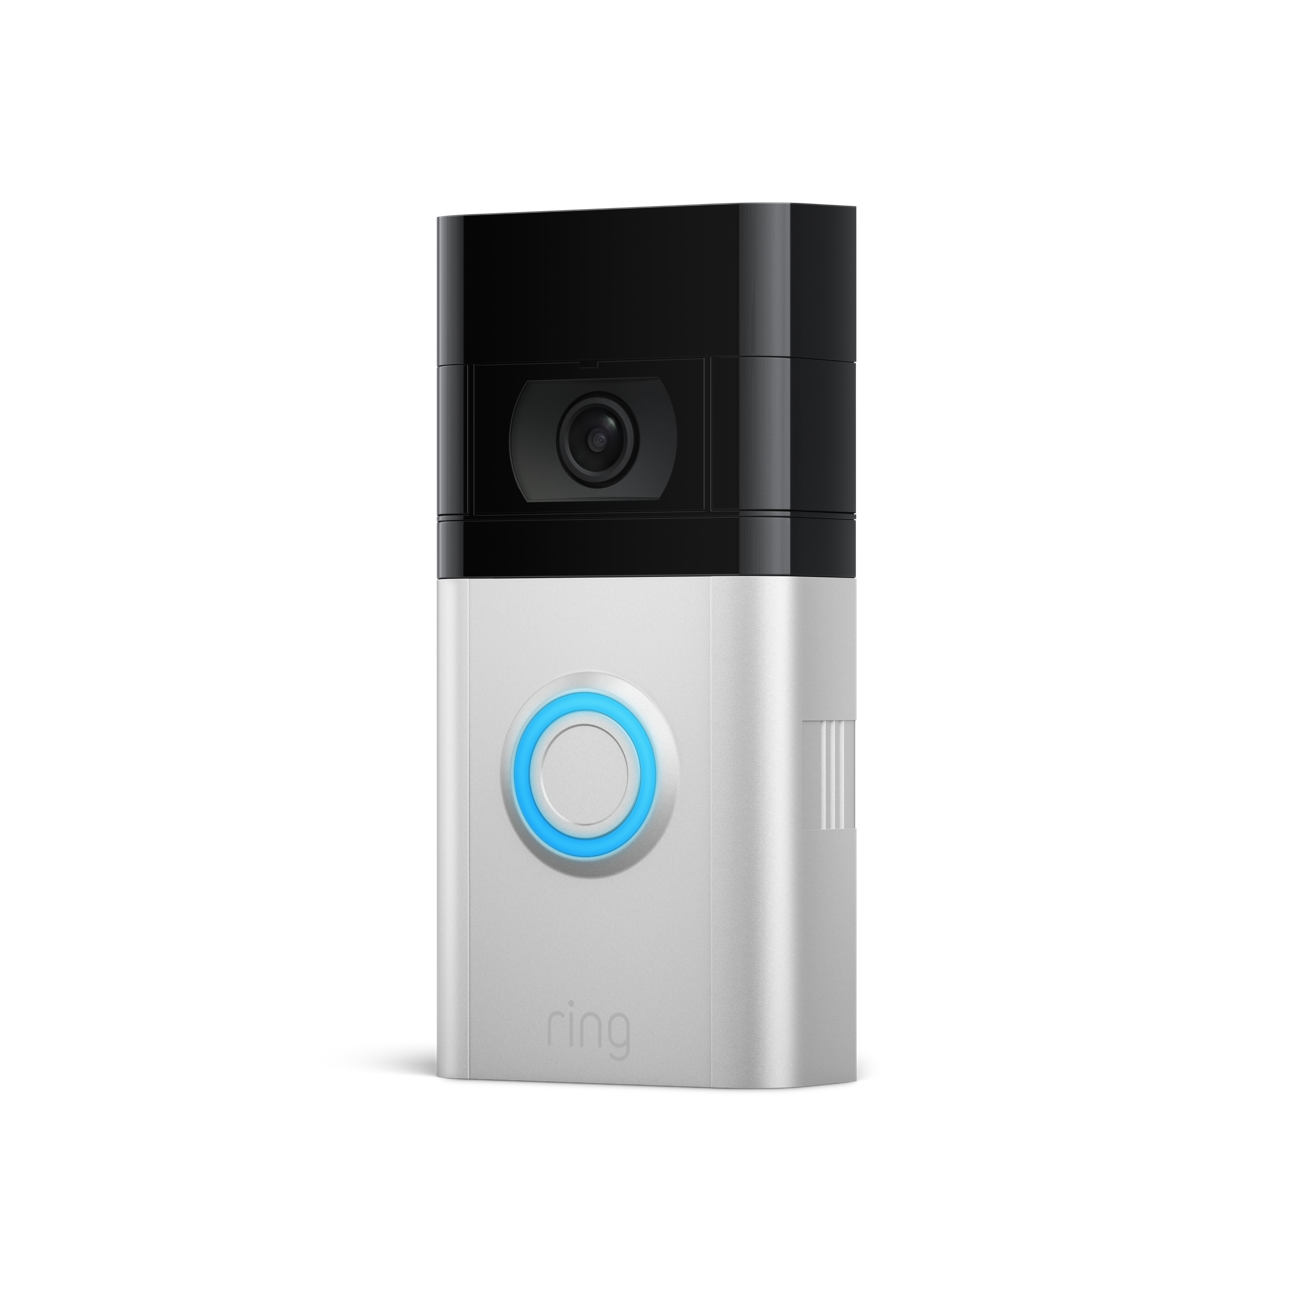 Ring Smart Video Doorbell 3 Plus with Built-in Wi-Fi & Camera - Refurbished Good